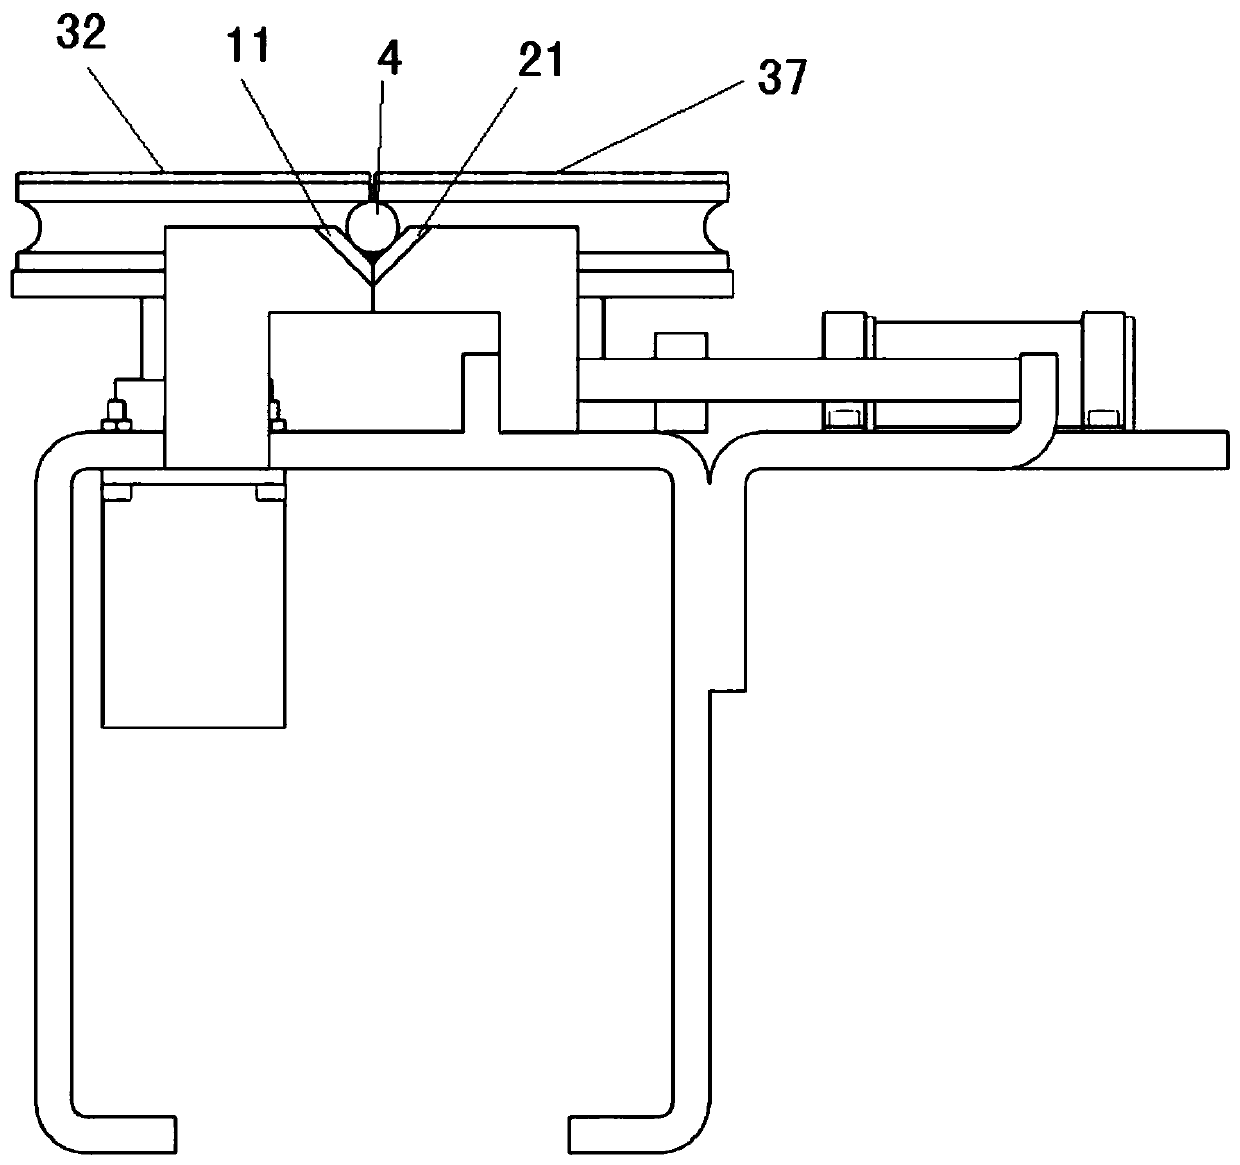 A rubber hose conveying and blanking device